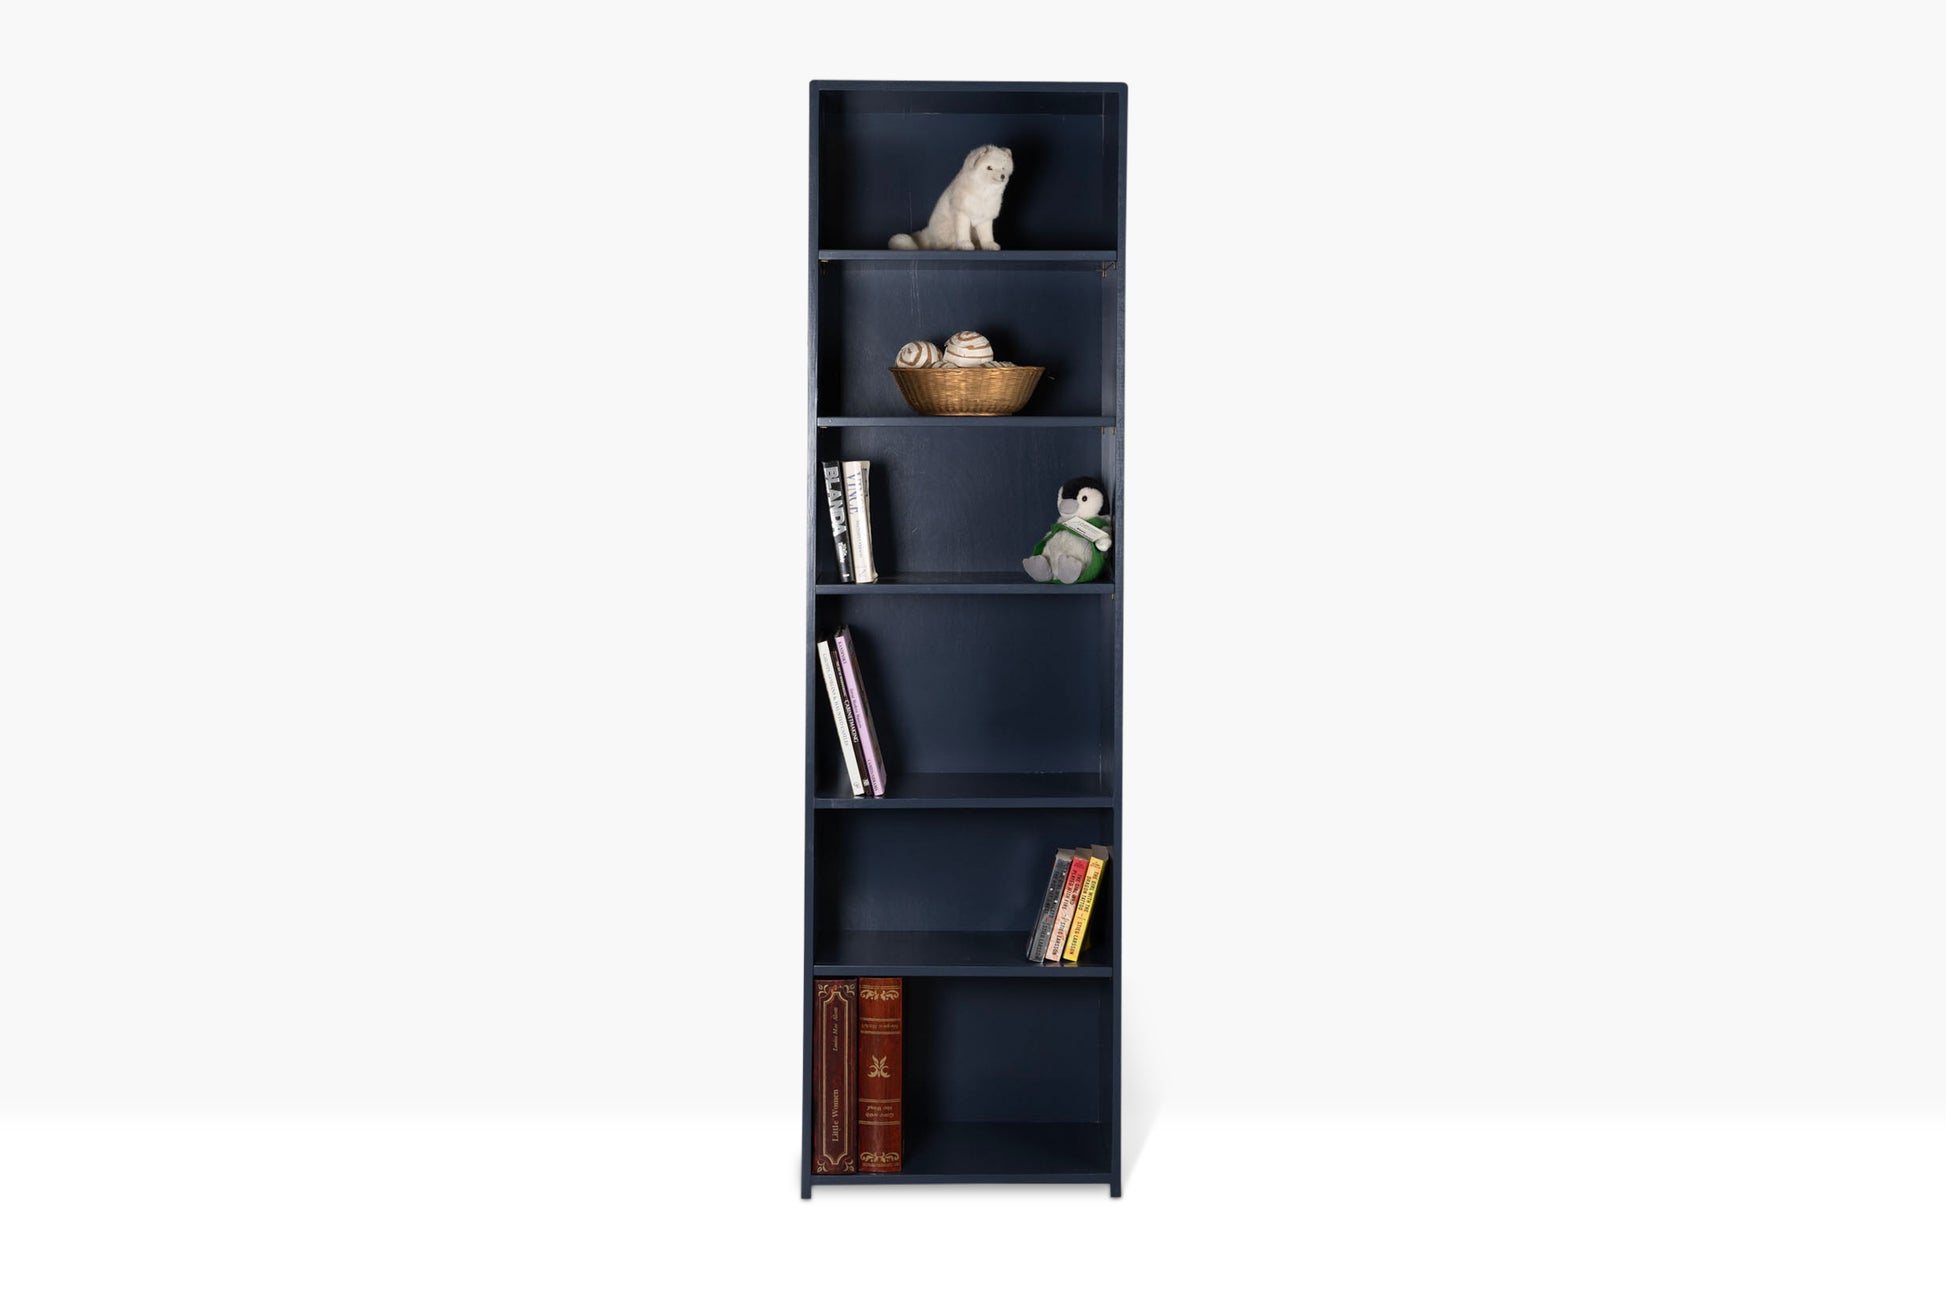 Berkshire Traditional Bookcase in Hale Navy. Features adjustable shelving.